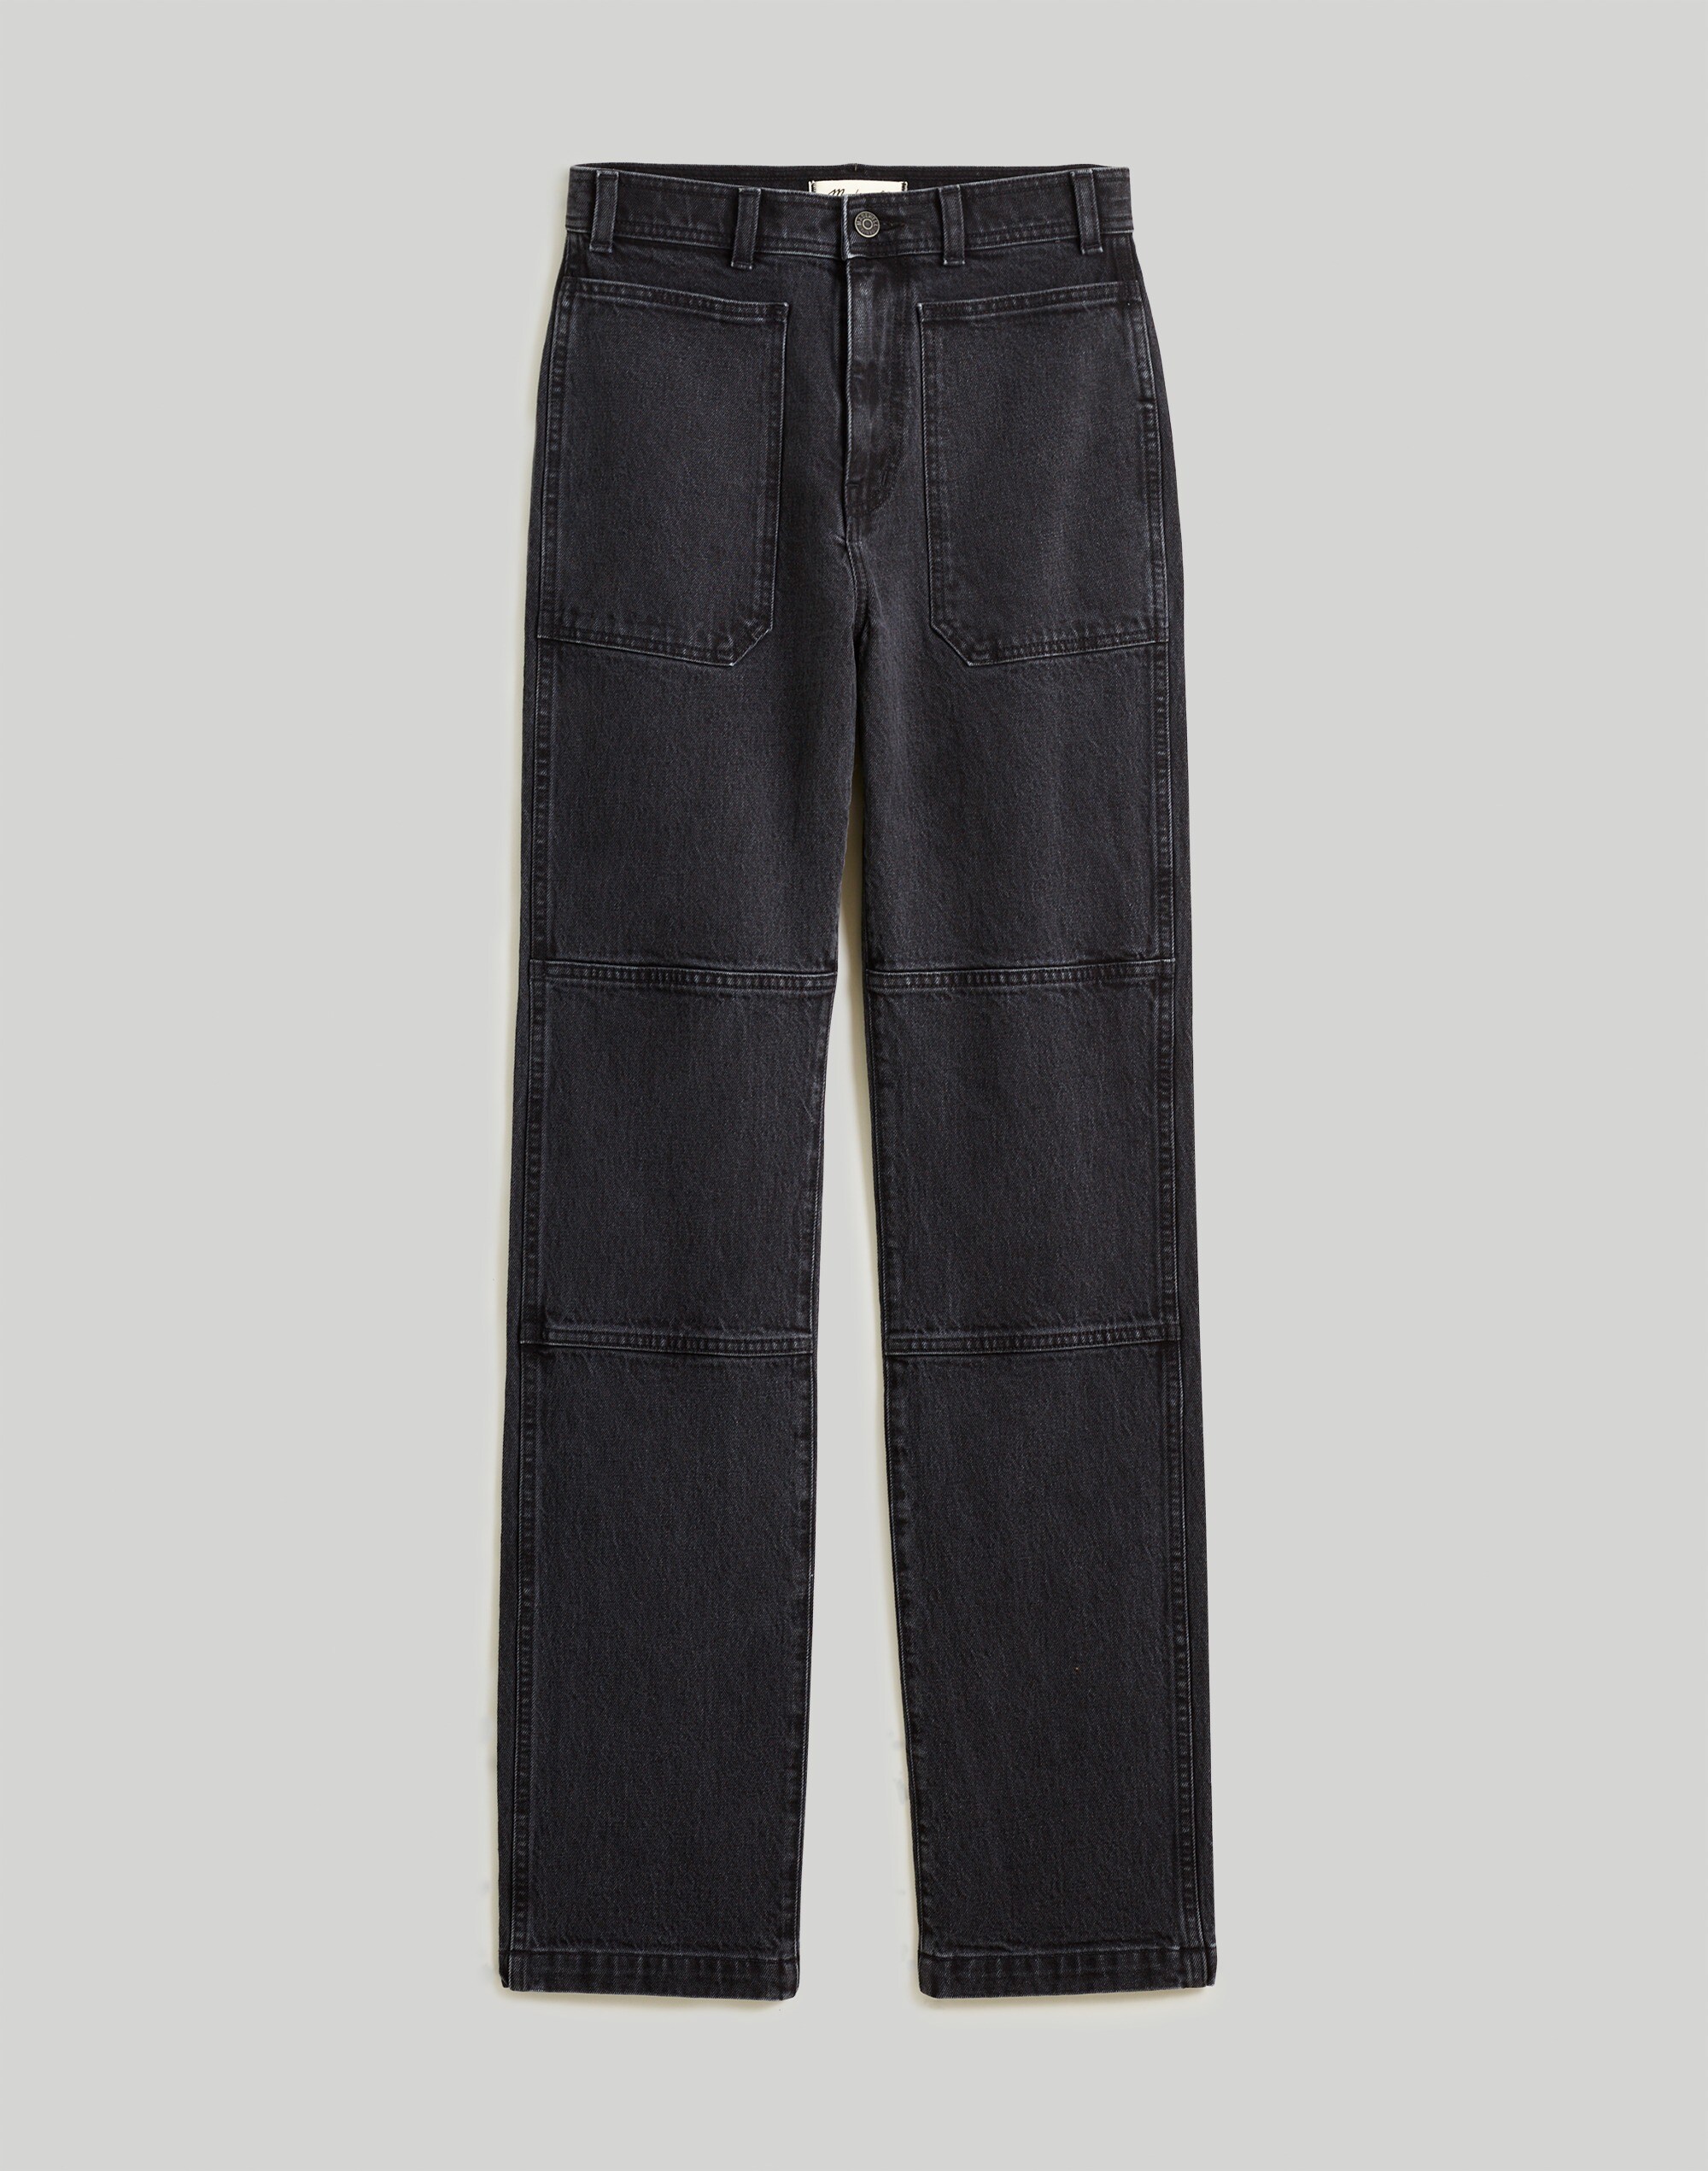 The Plus '90s Straight Utility Jean in Camplin Wash